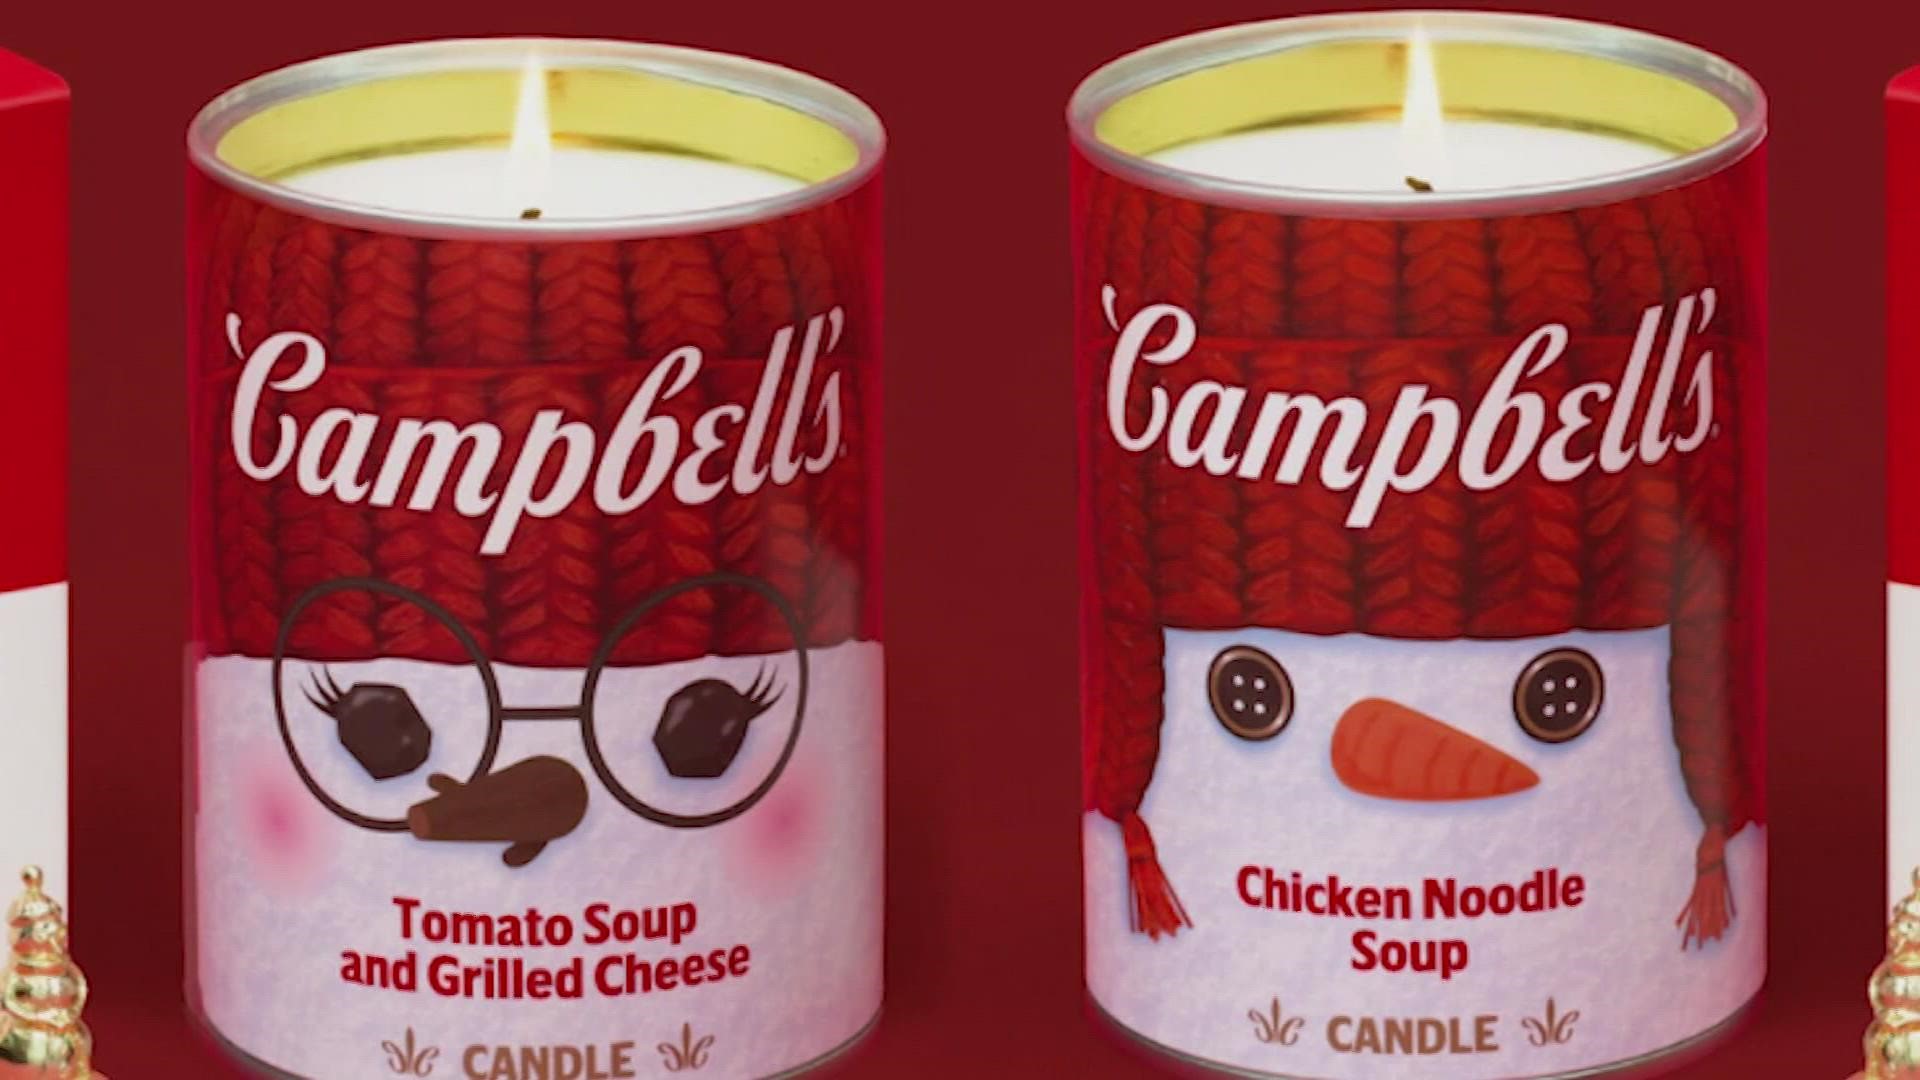 Need the nostalgic scent of Campbell's Chicken Noodle Soup in your nostrils? There's a candle for that.